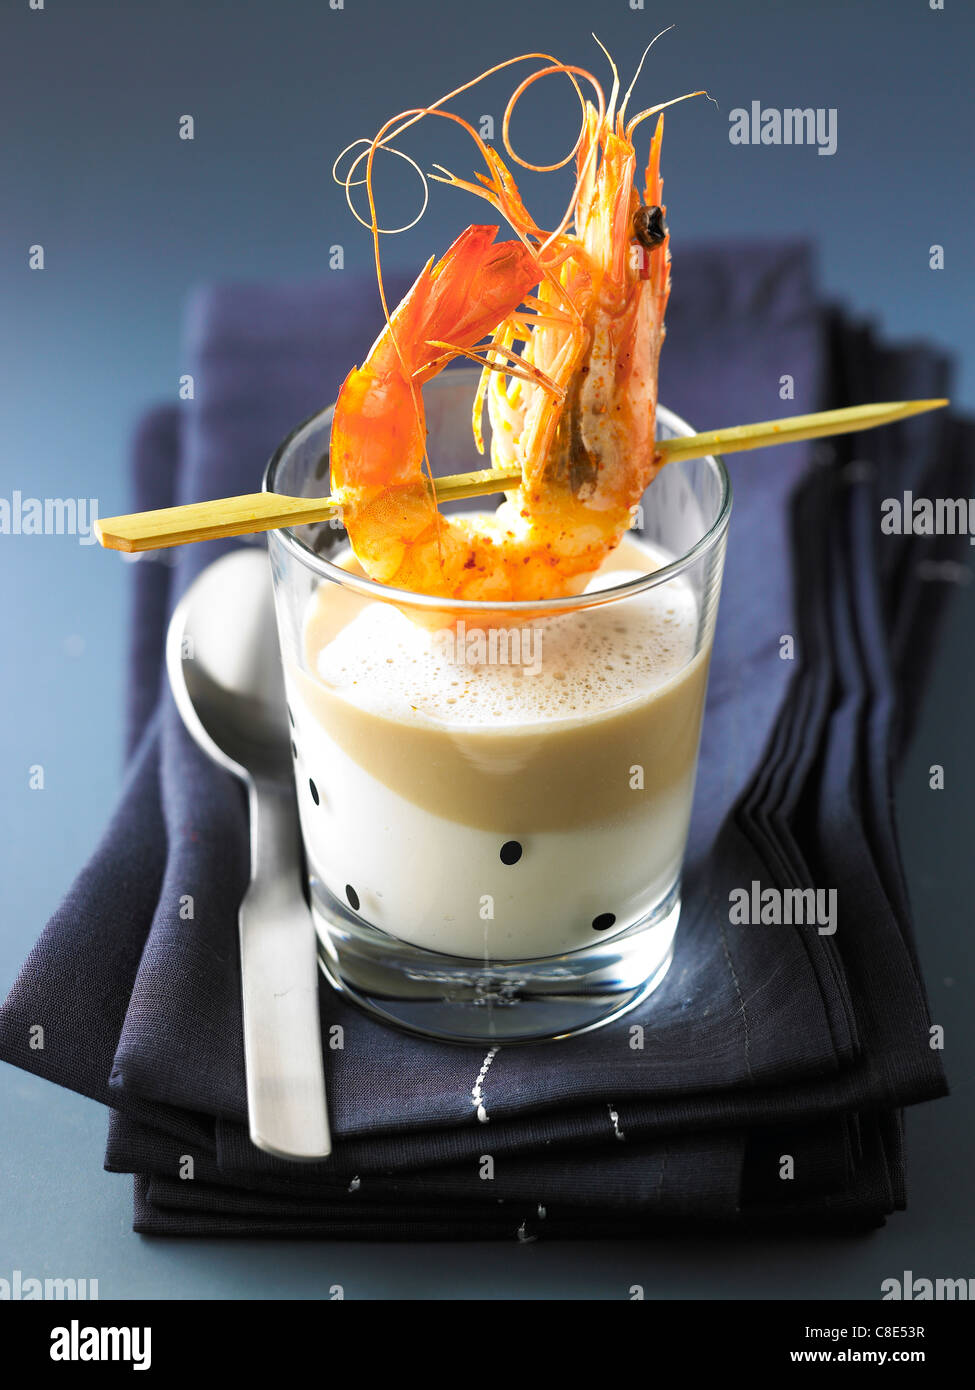 Cream of parsnip,chestnut emulsion and grilled gambas Stock Photo